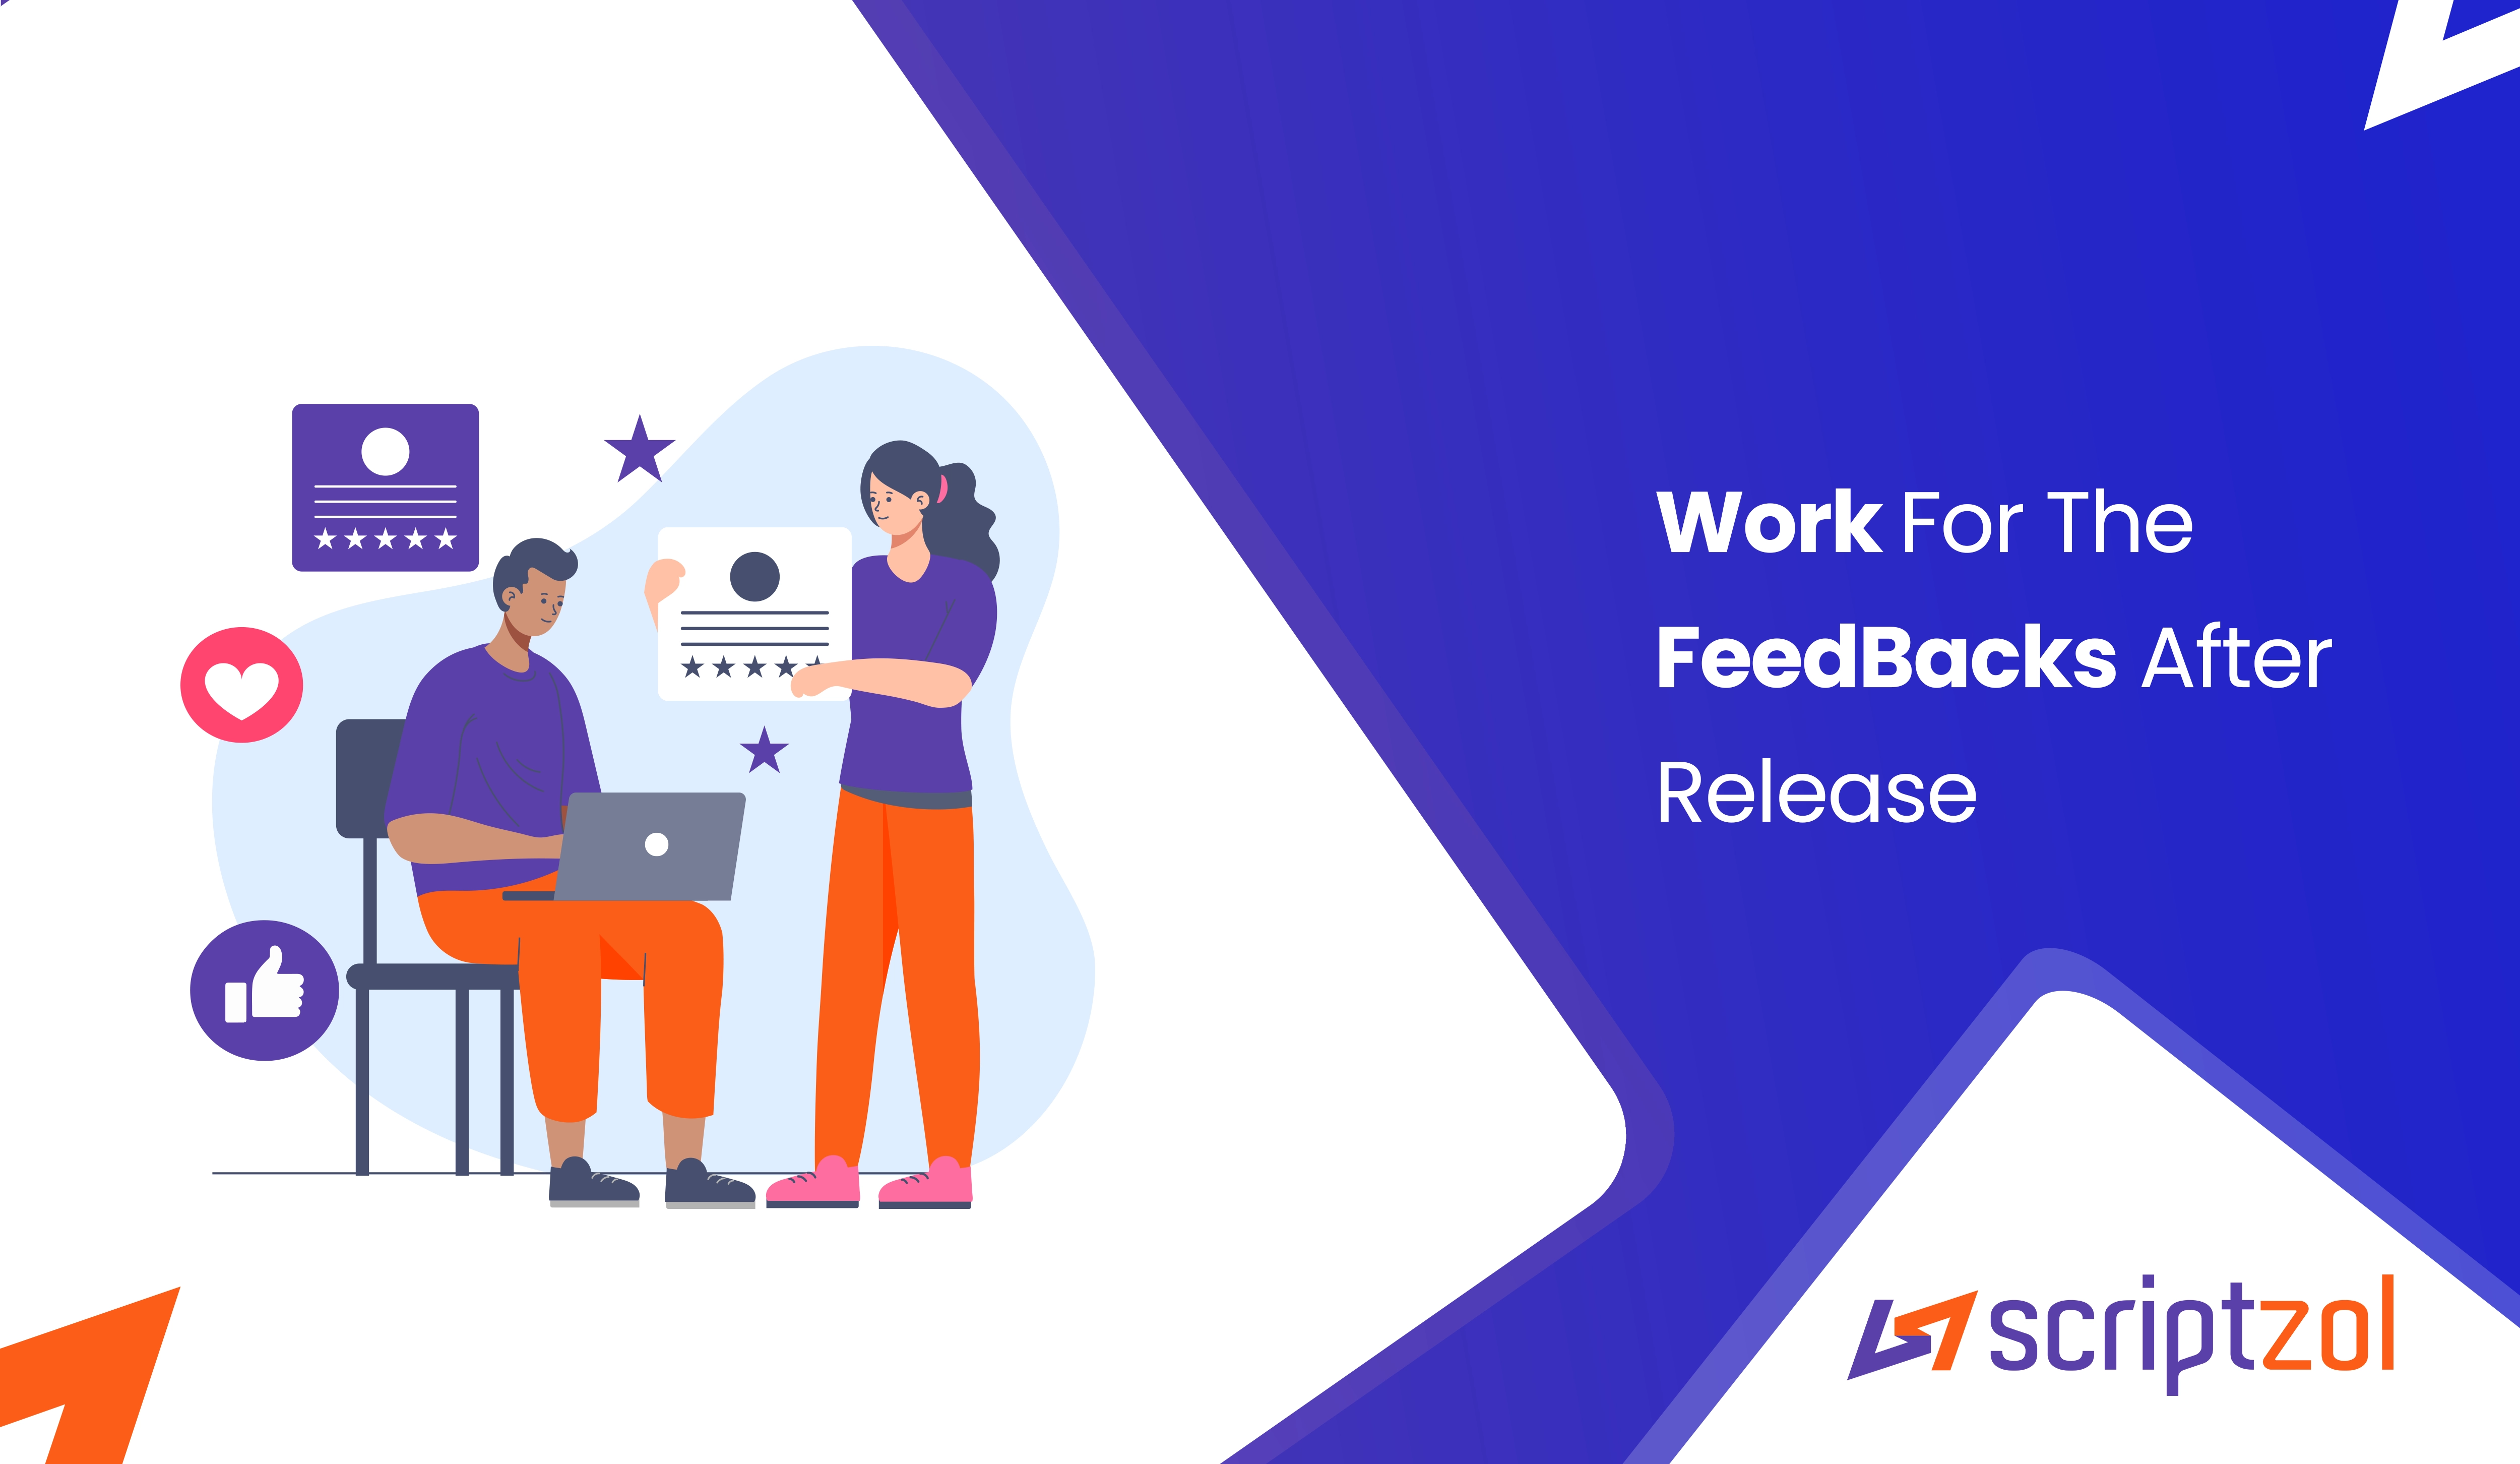 Work For The Feedbacks After Release